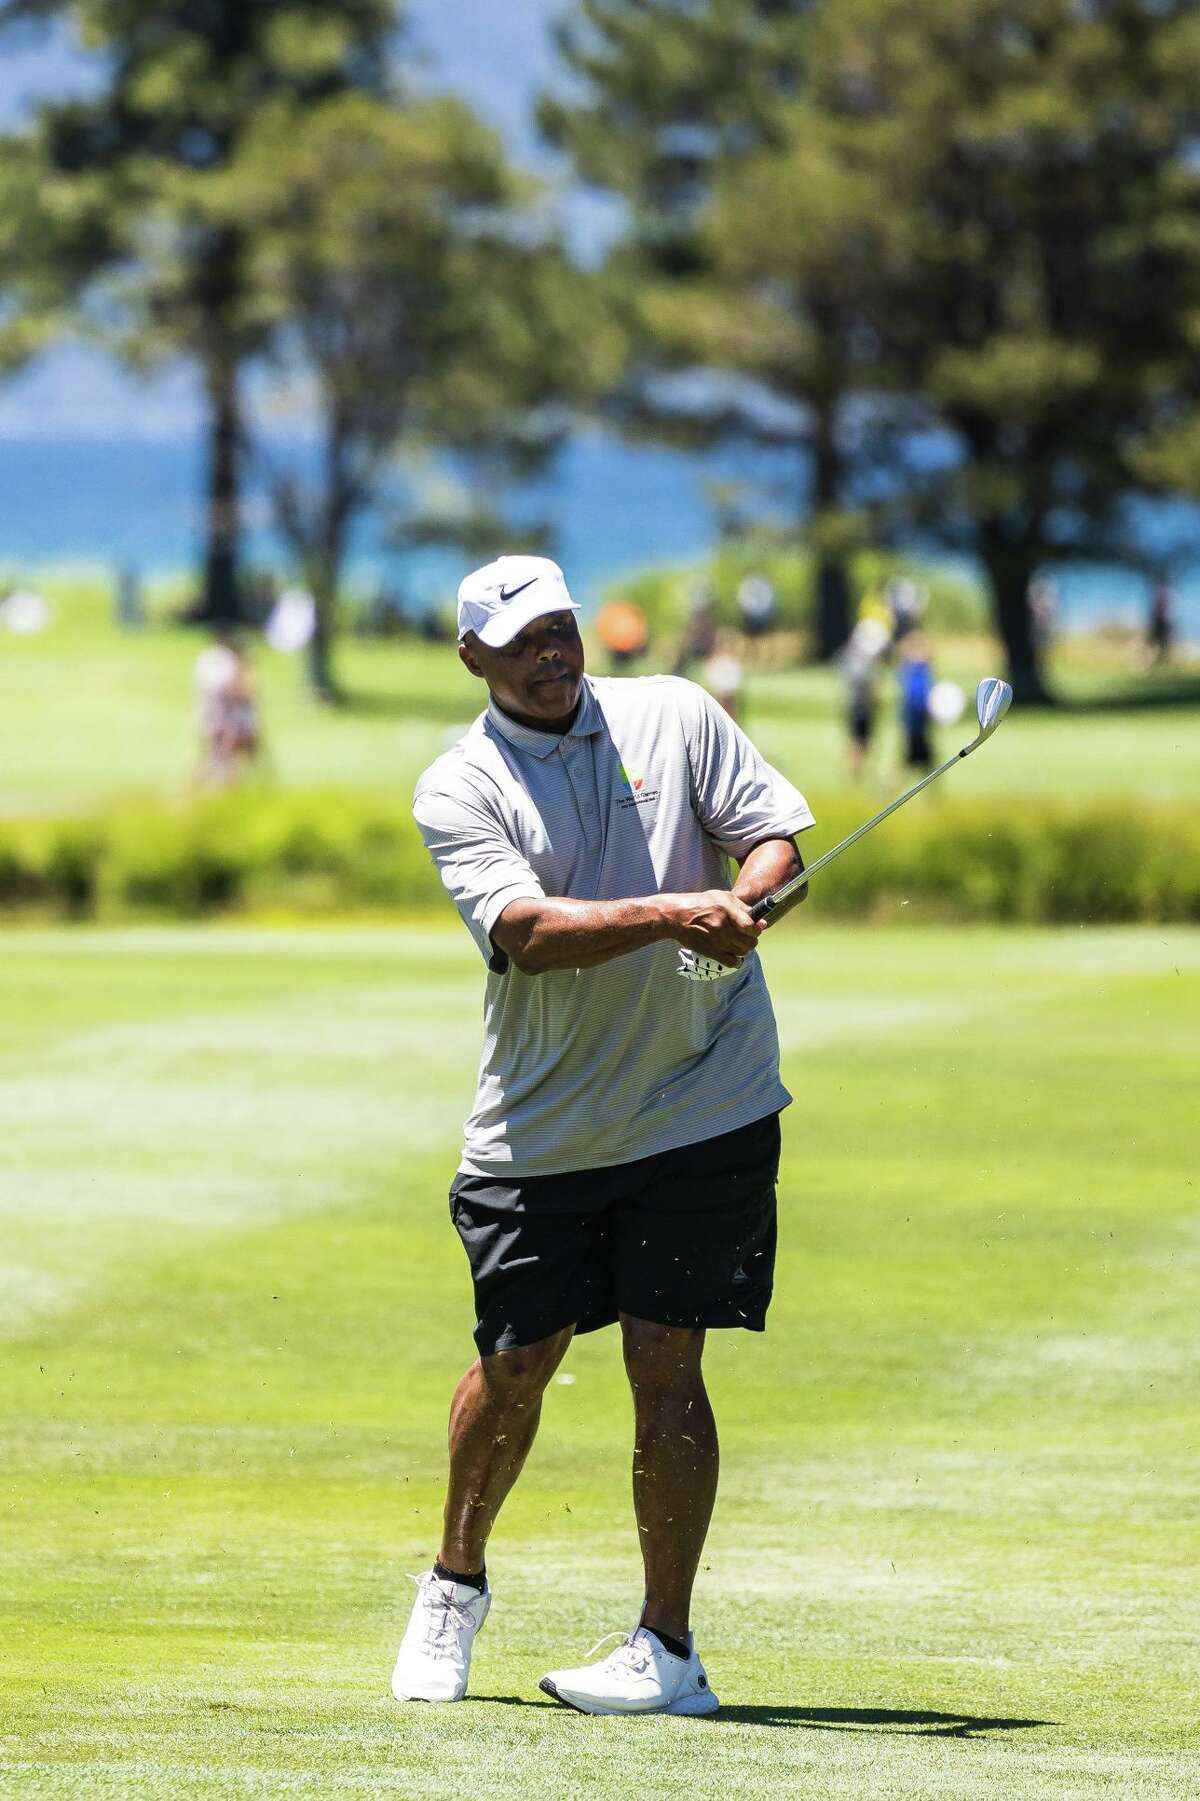 Charles Barkley hits his approach shot on No. 10 on Thursday at Edgewood Tahoe.